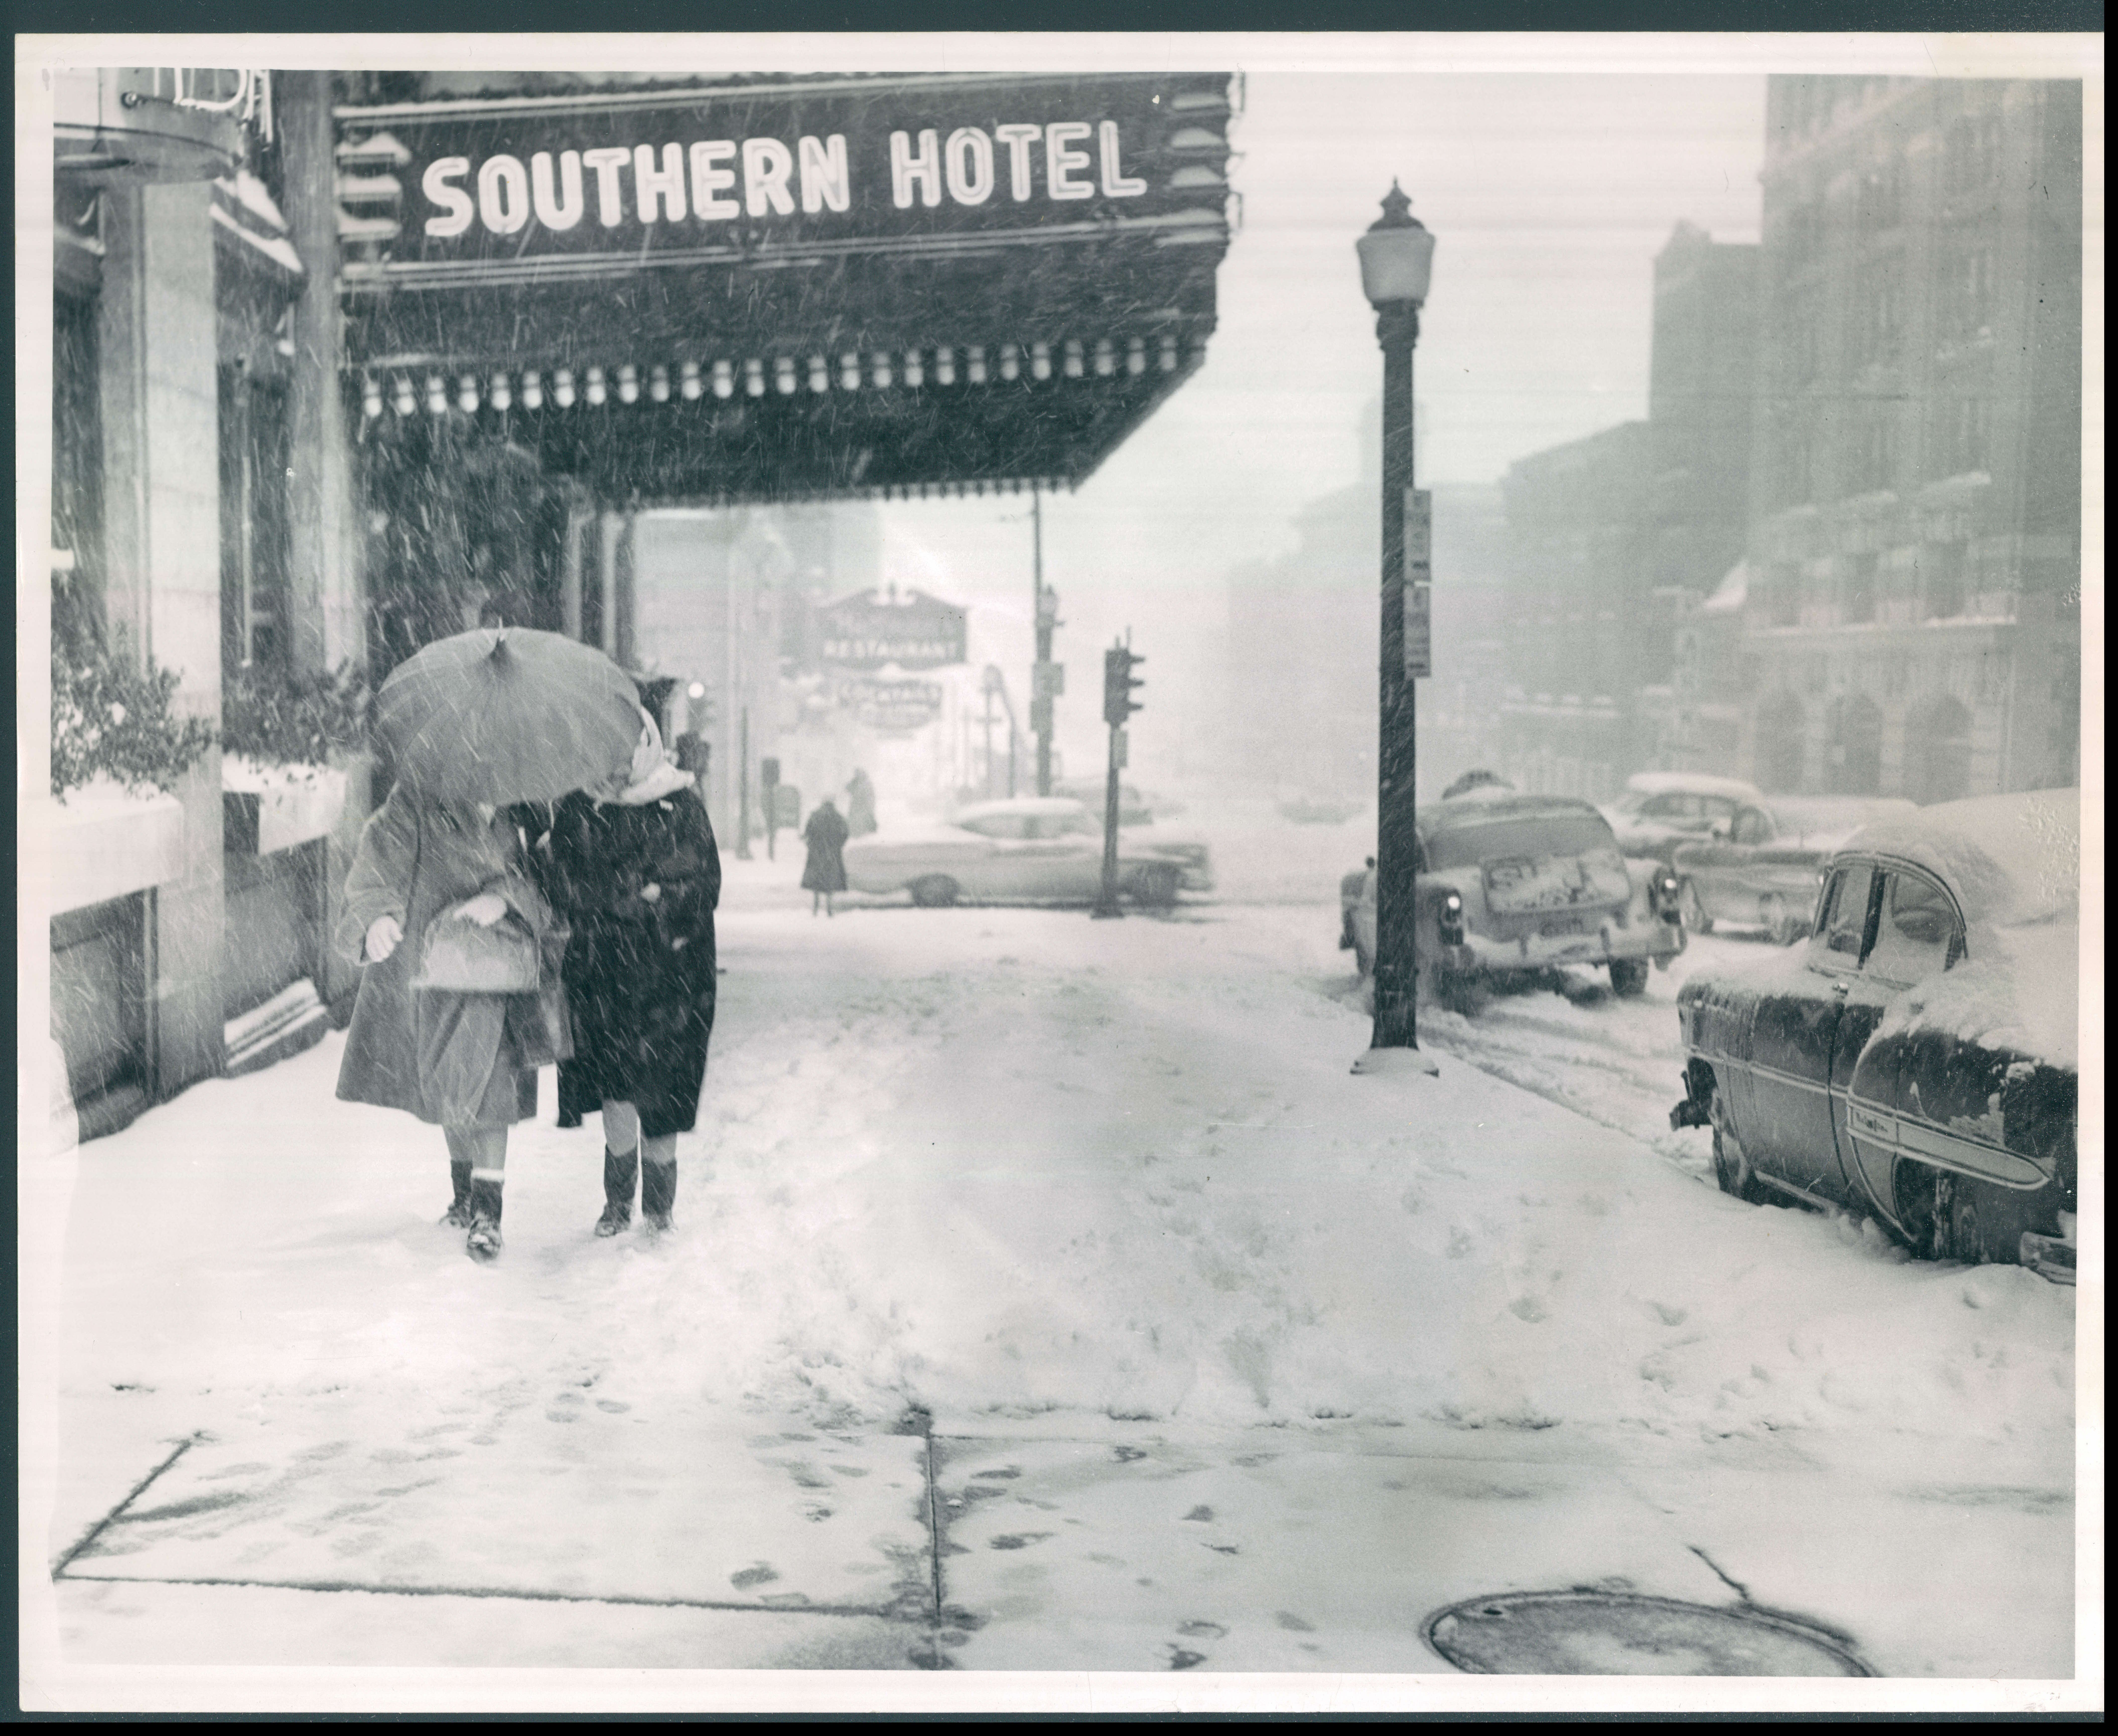 March 3, 1960 - SNOW STORM -- Fine snowflakes blur the quiet, sparsely populated downtown scene in a 9-inch snowstorm, the cityâ€™s most severe snowfall of the year. Photo by Walter M. McCardell BIW-579-BSDate Created: 1960-03-05 Copyright Notice: Baltimore Sun Folder Description: Baltimore Weather Snow Folder Extended Description: 3/3/1960 | 589-11B | Oversized | Title: WEATHER SNOW BALTIMORE MARCH 3, 1960 Subject: WEATHER SNOW BALTIMORE